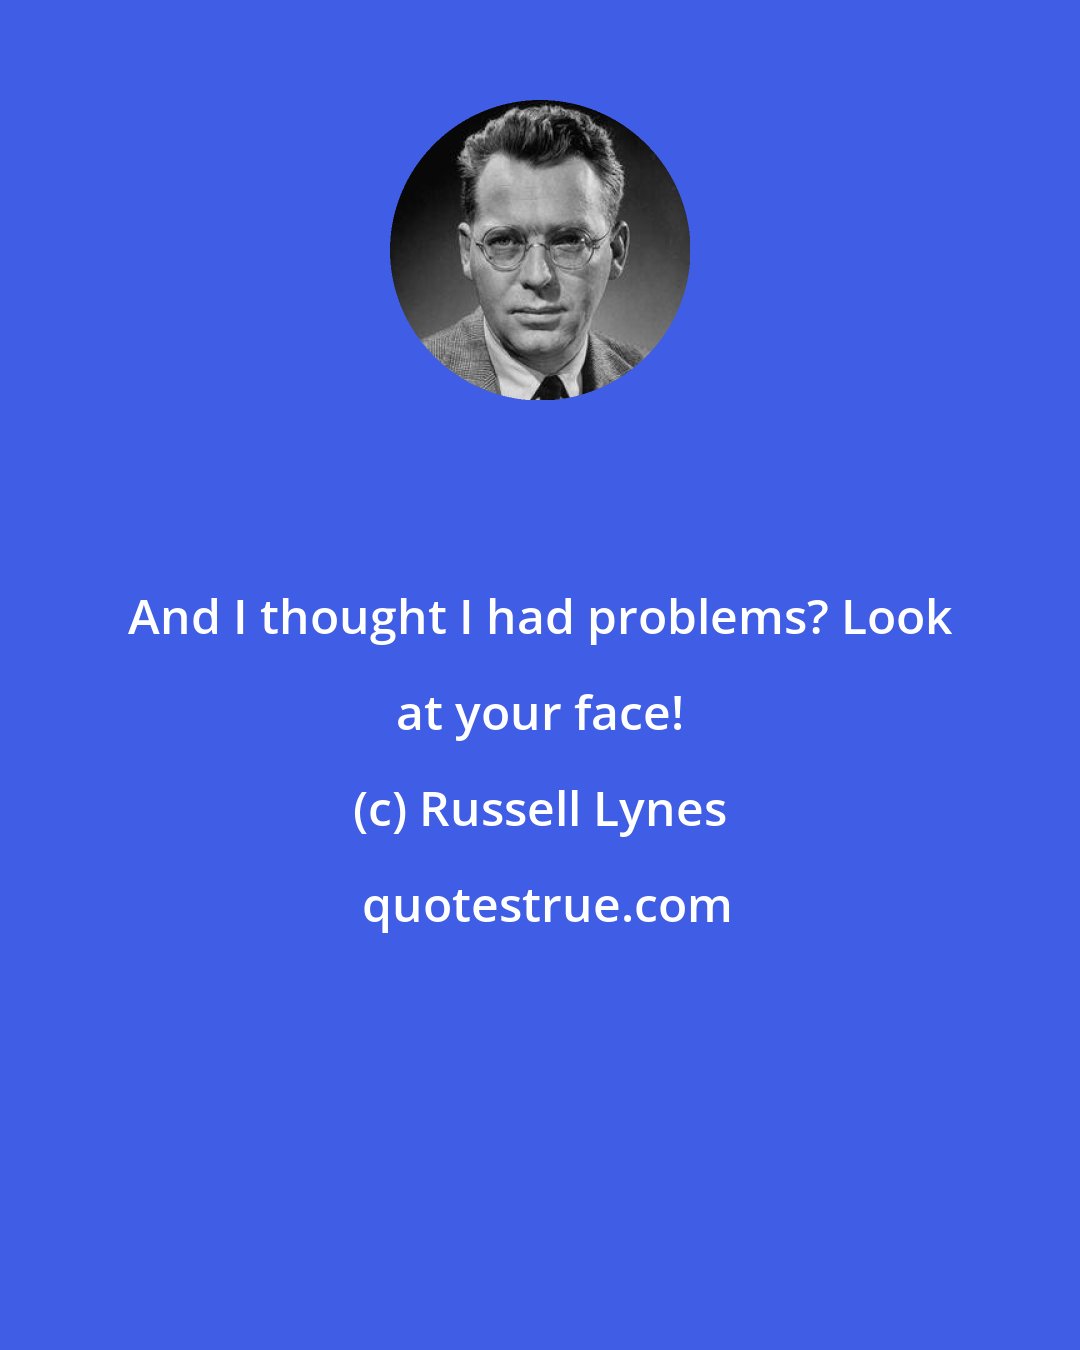 Russell Lynes: And I thought I had problems? Look at your face!